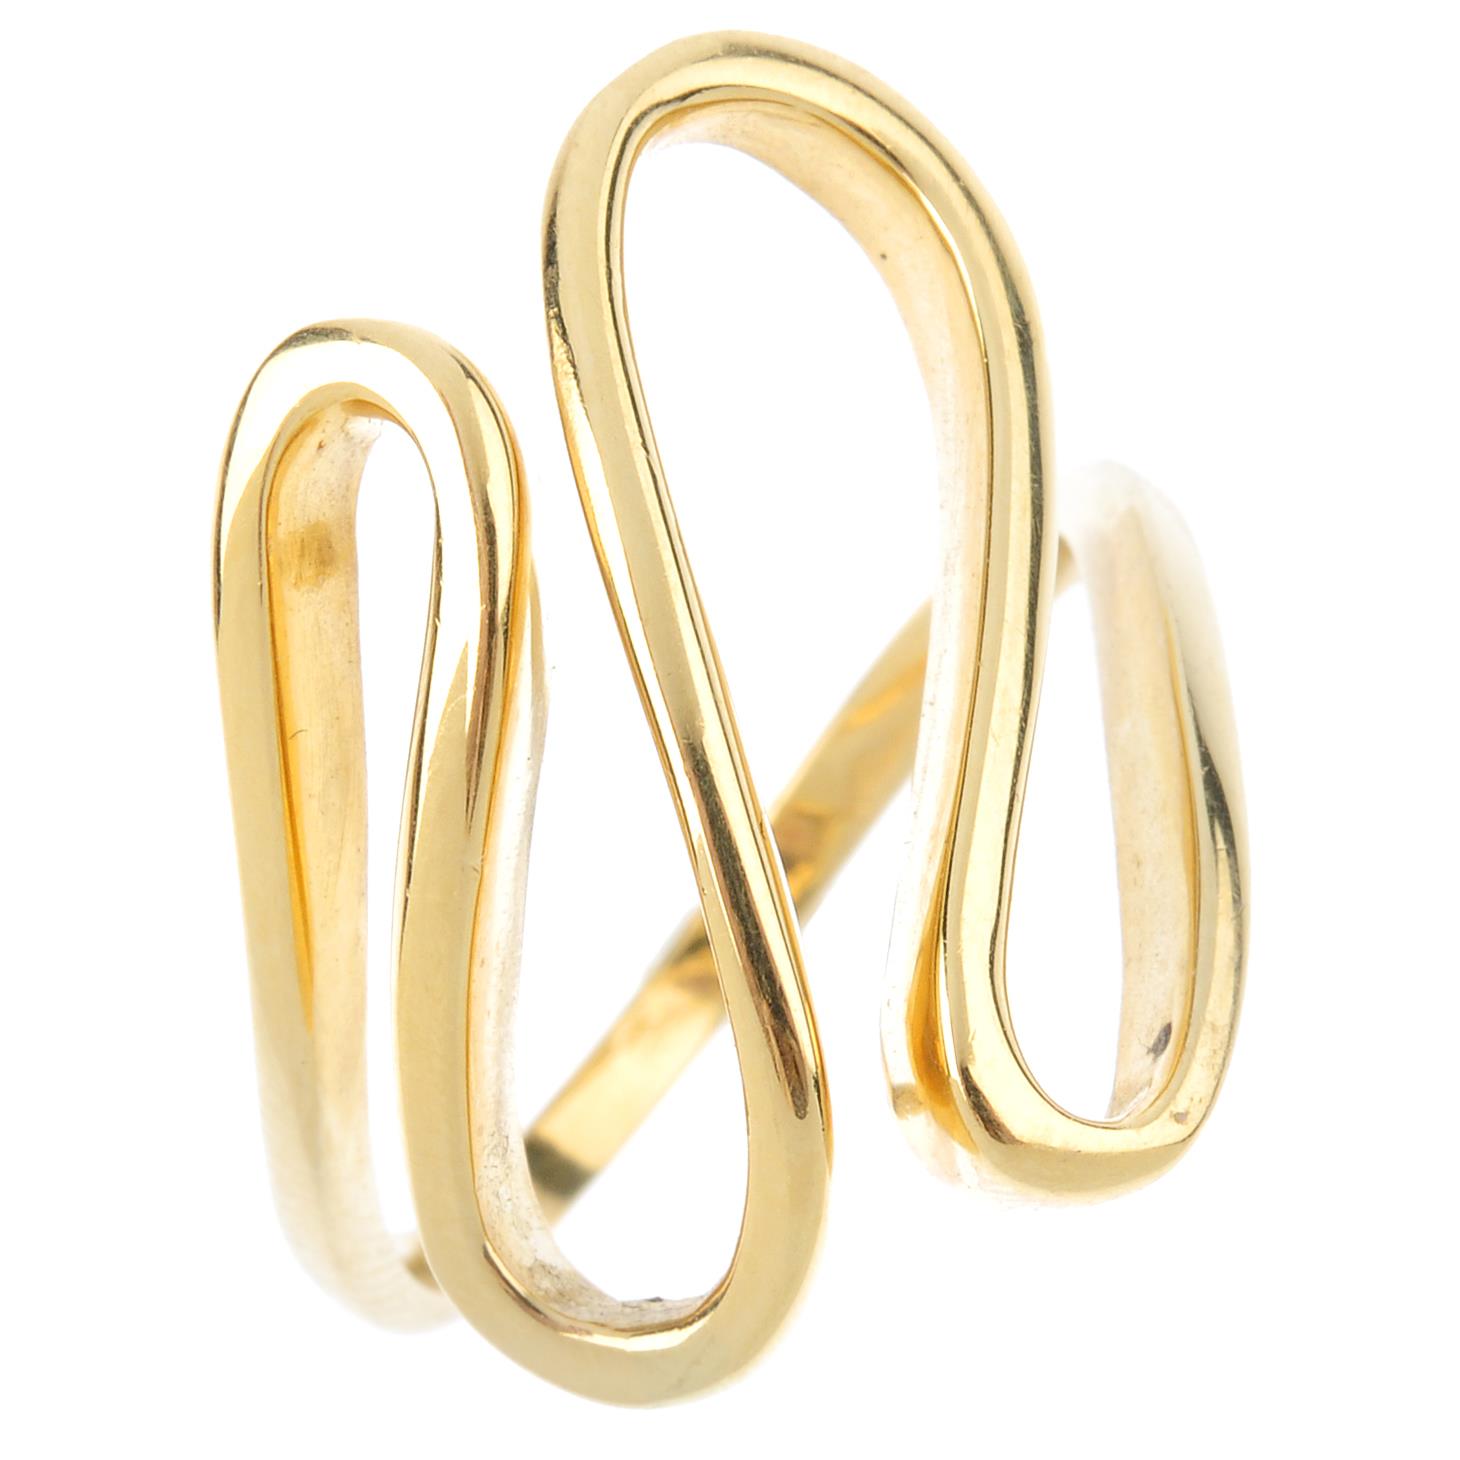 A dress ring. The front designed as a series of scrolling loops, with plain band. Ring size O.